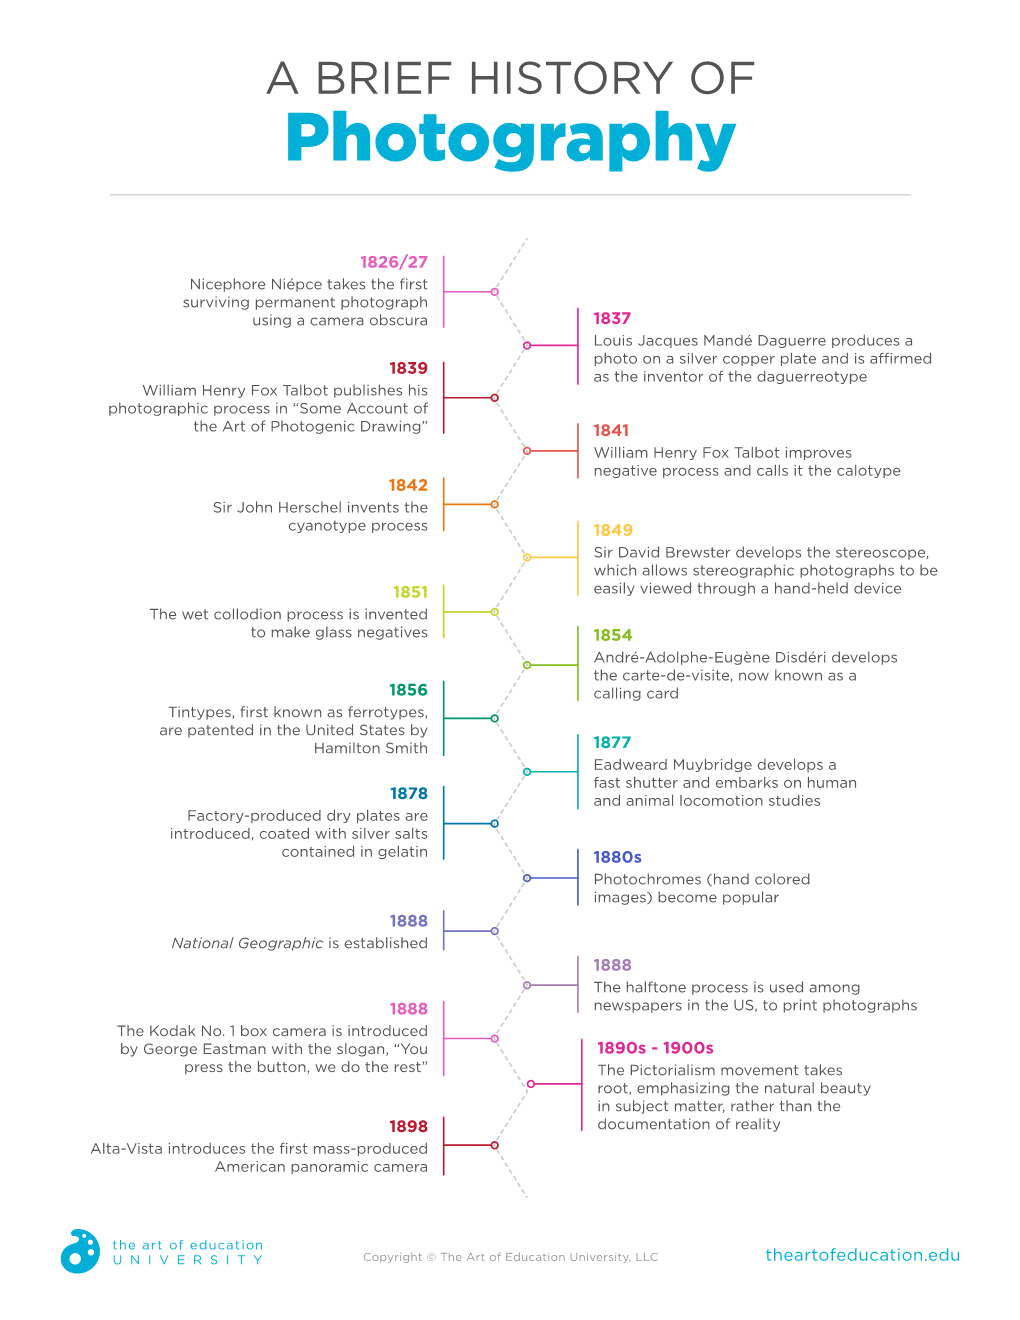 A BRIEF HISTORY of Photography